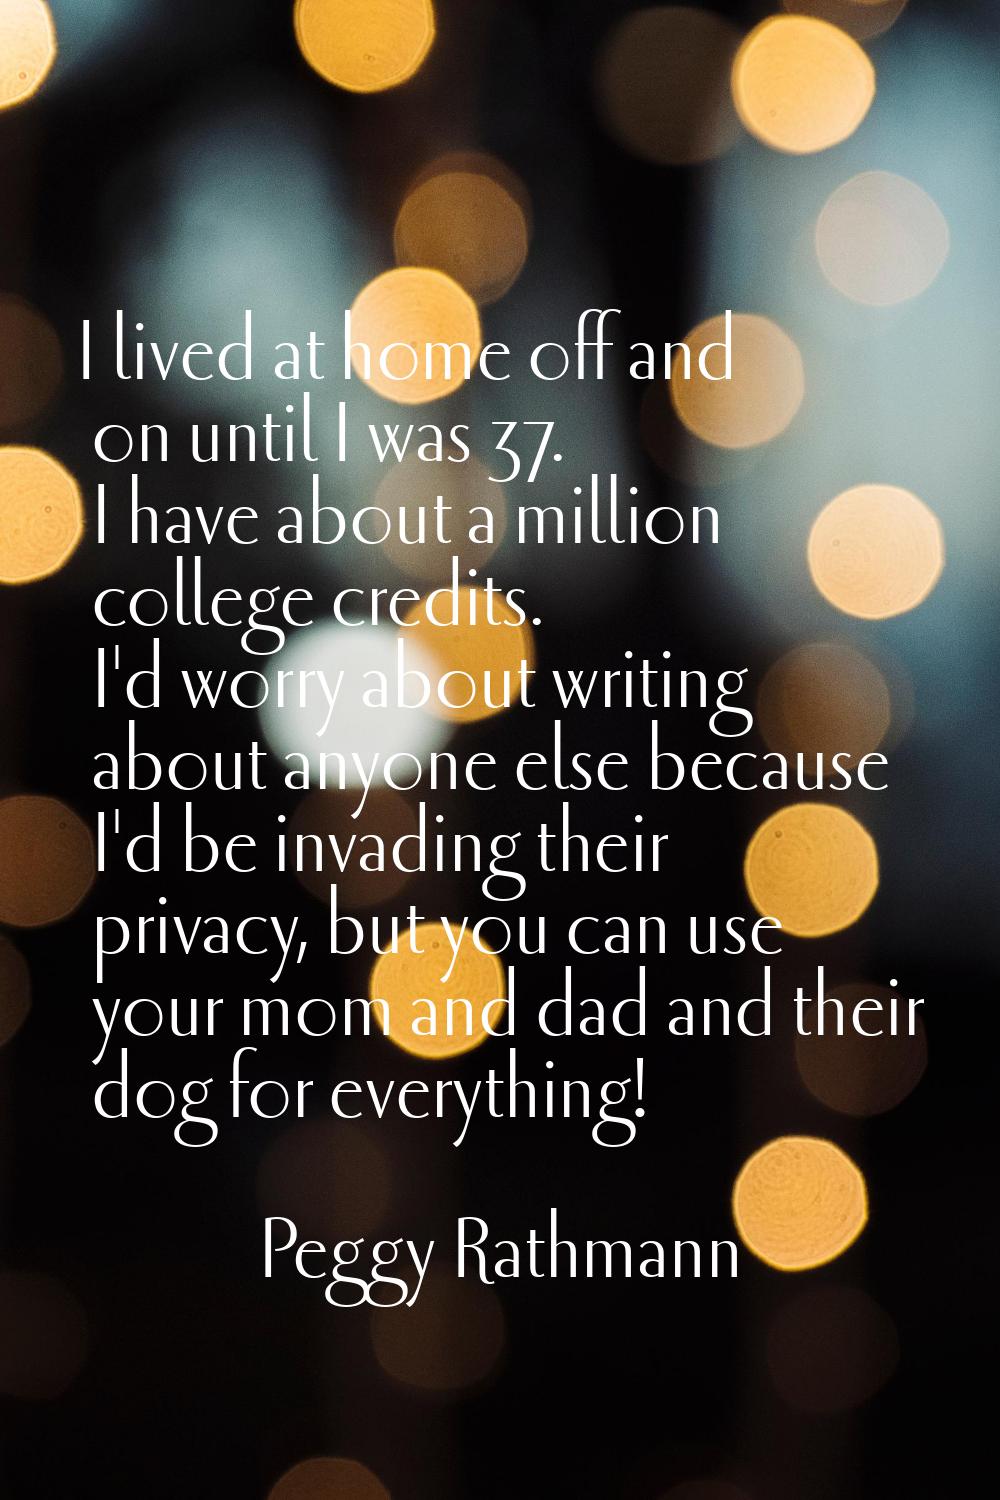 I lived at home off and on until I was 37. I have about a million college credits. I'd worry about 